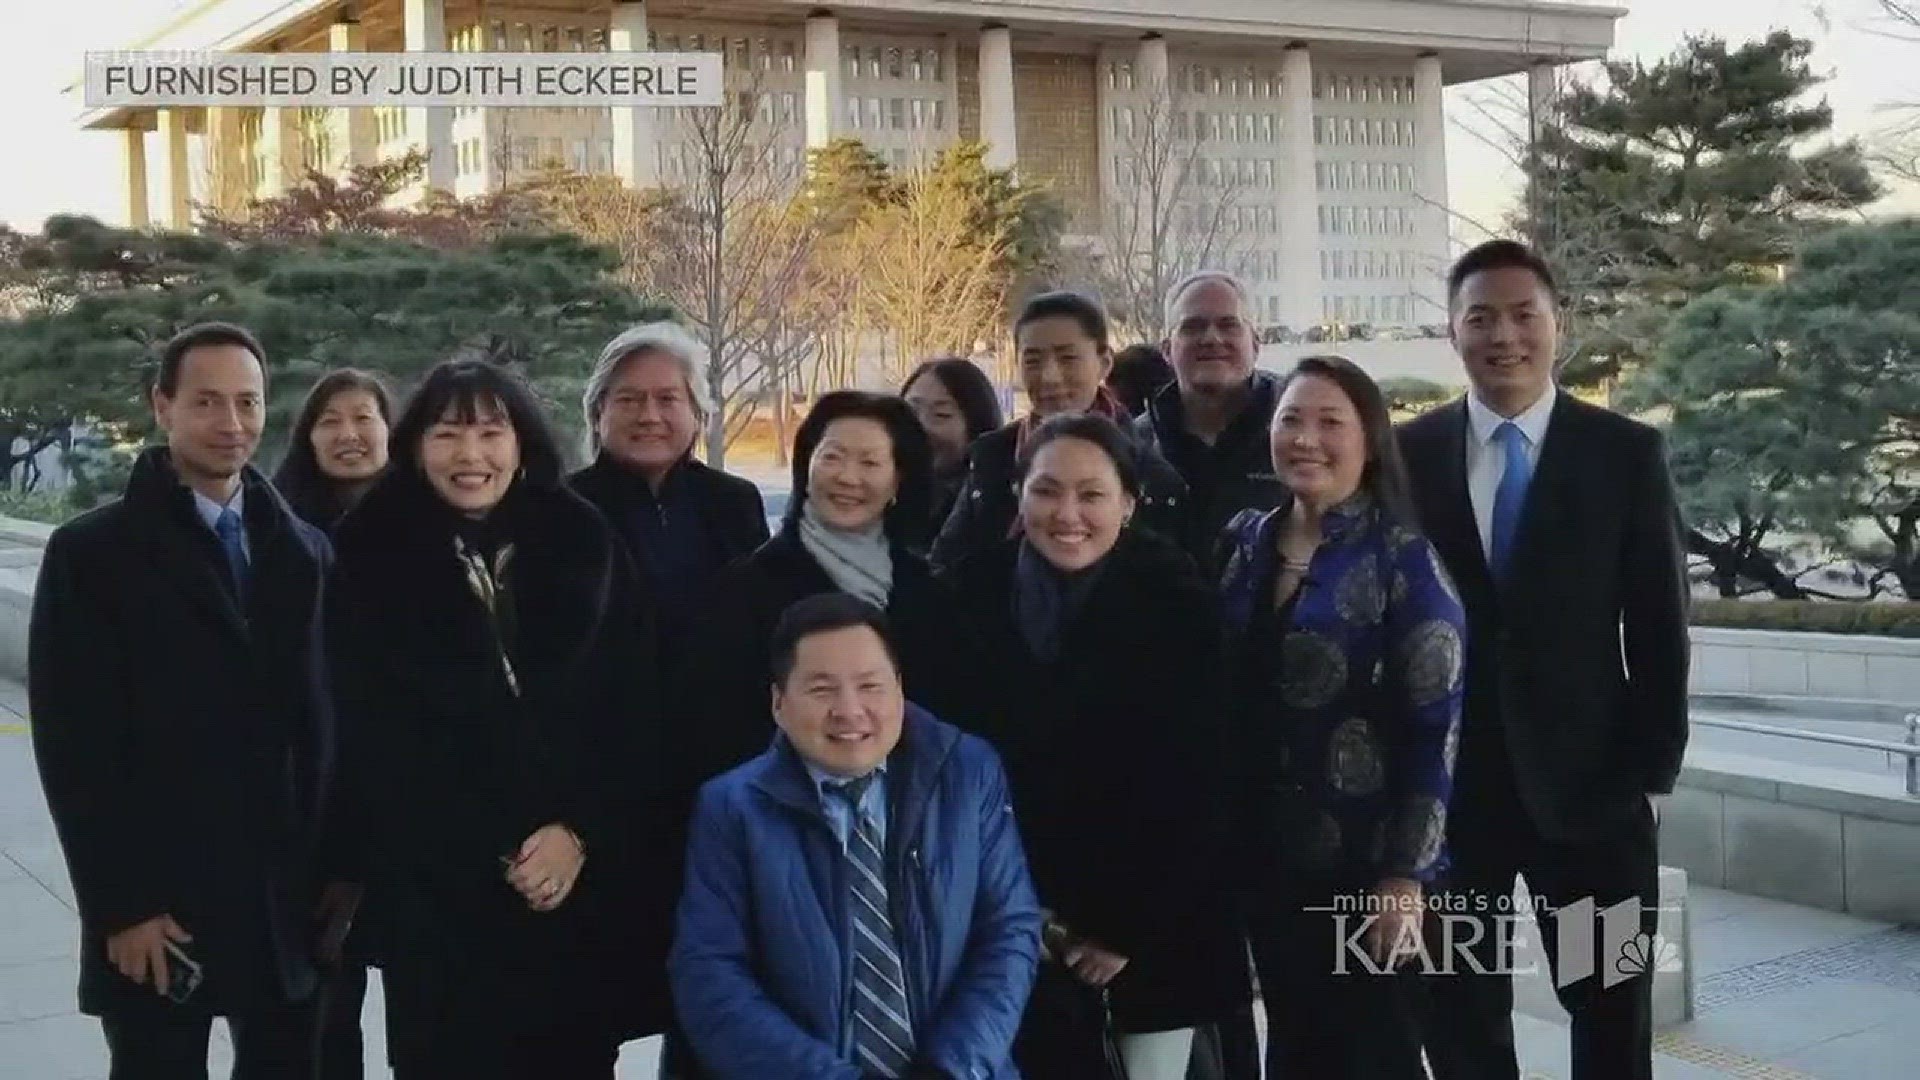 With the Winter Olympics going on, one small group of South Korean adoptees is hoping to get the attention of South Korean lawmakers. They want to see a change in adoption laws, to ensure children can have the opportunity to be a part of a family. http://